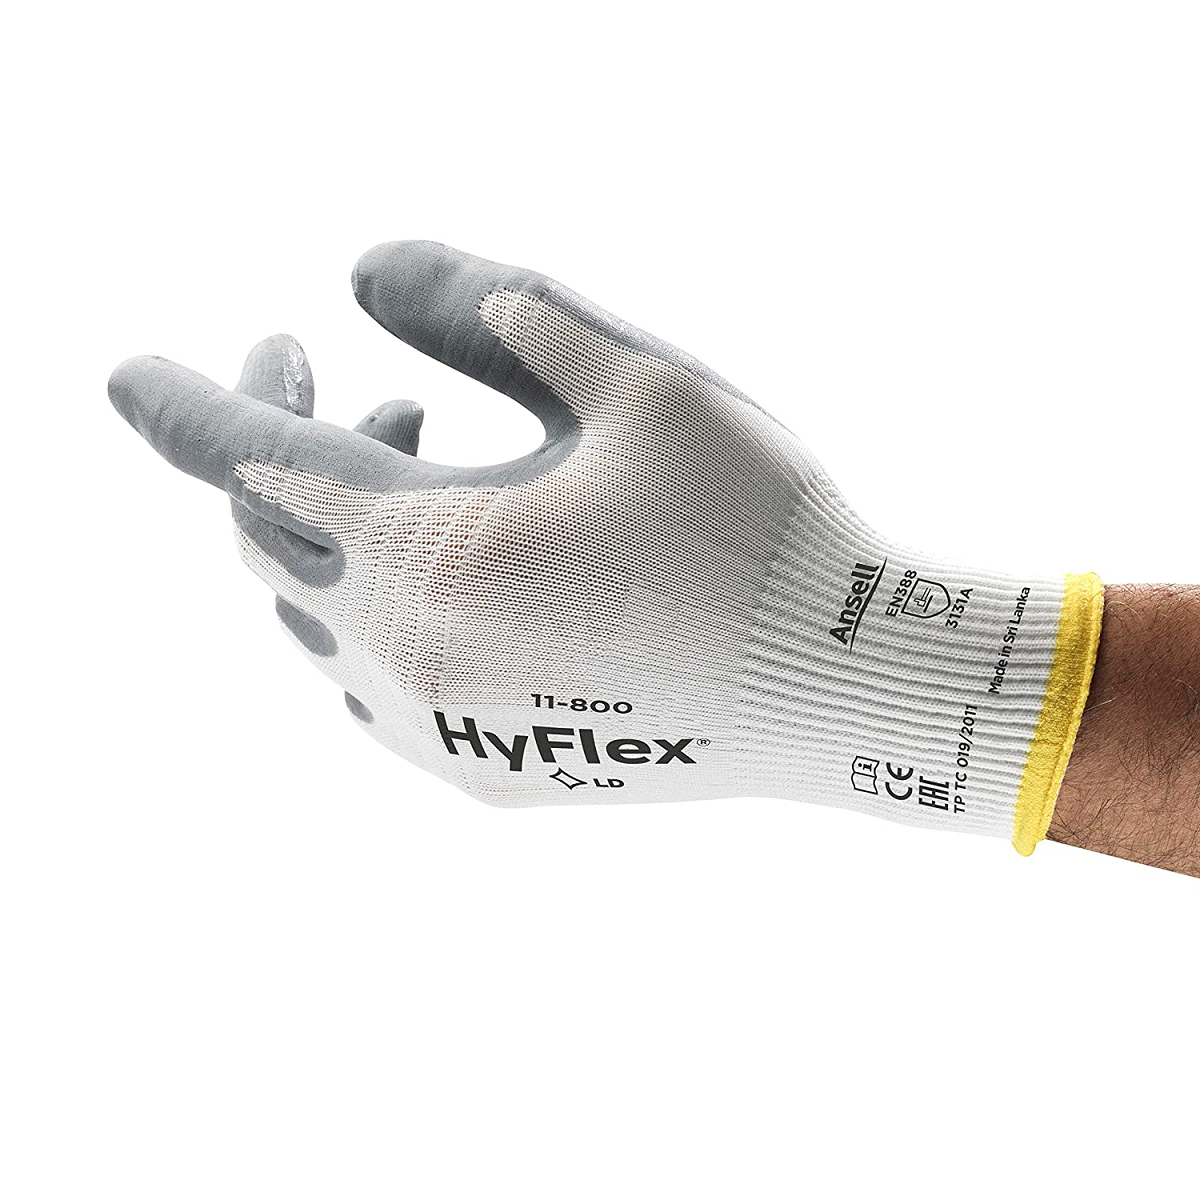 Airgas - ANE80-100-7 - Ansell Size 7 ActivArmr® Natural Latex Rubber Coated  Work Gloves With Cotton And Polyester Liner And Knit Wrist